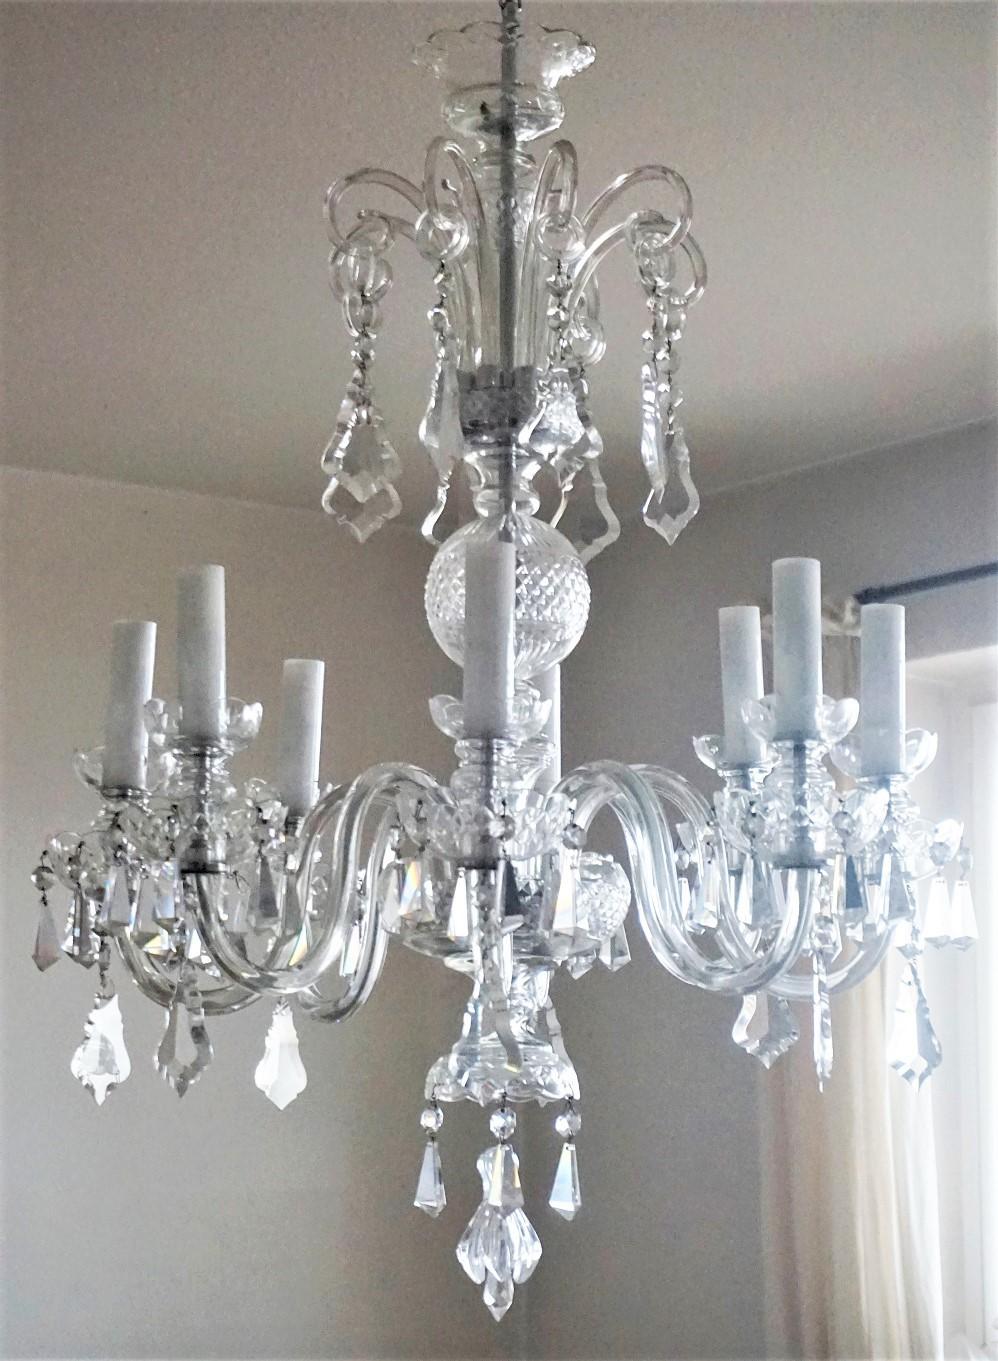 Murano Glass Crystal Eight-Light Chandelier, Italy, 1910-1920 For Sale 1